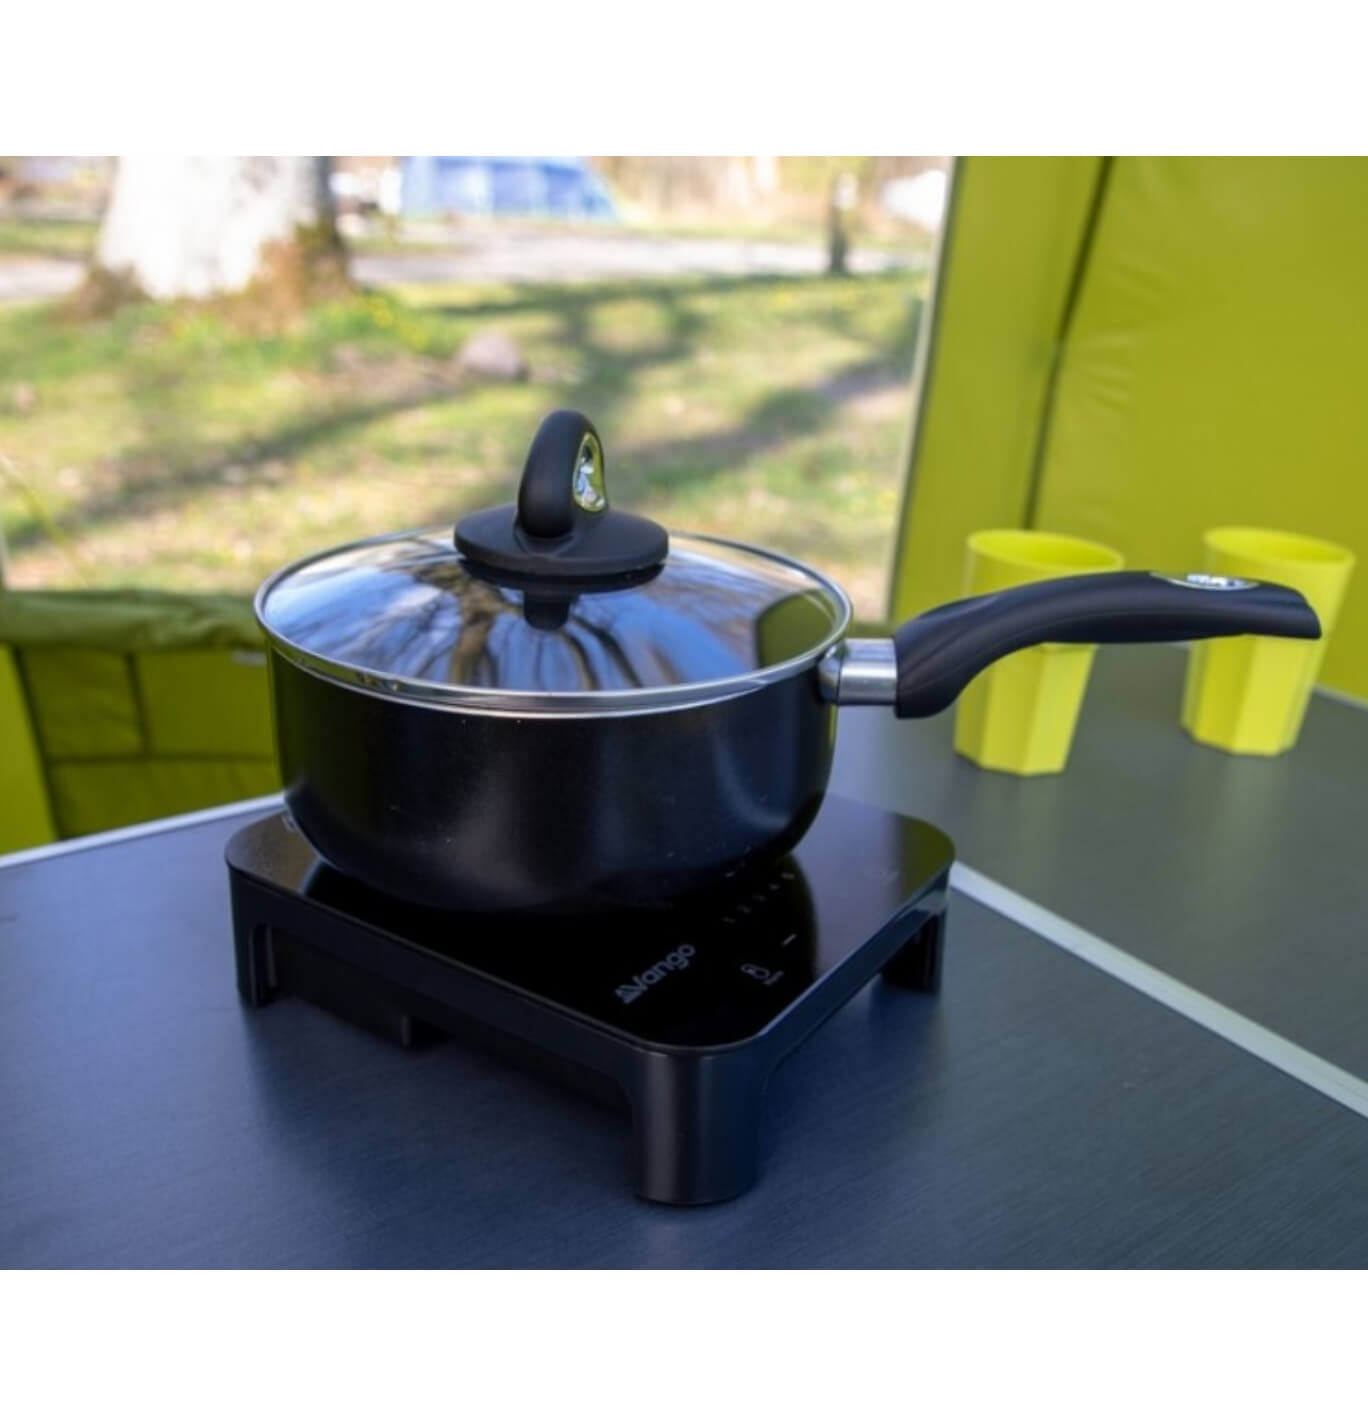 Vango Sizzle Induction Camping Cooker Hob